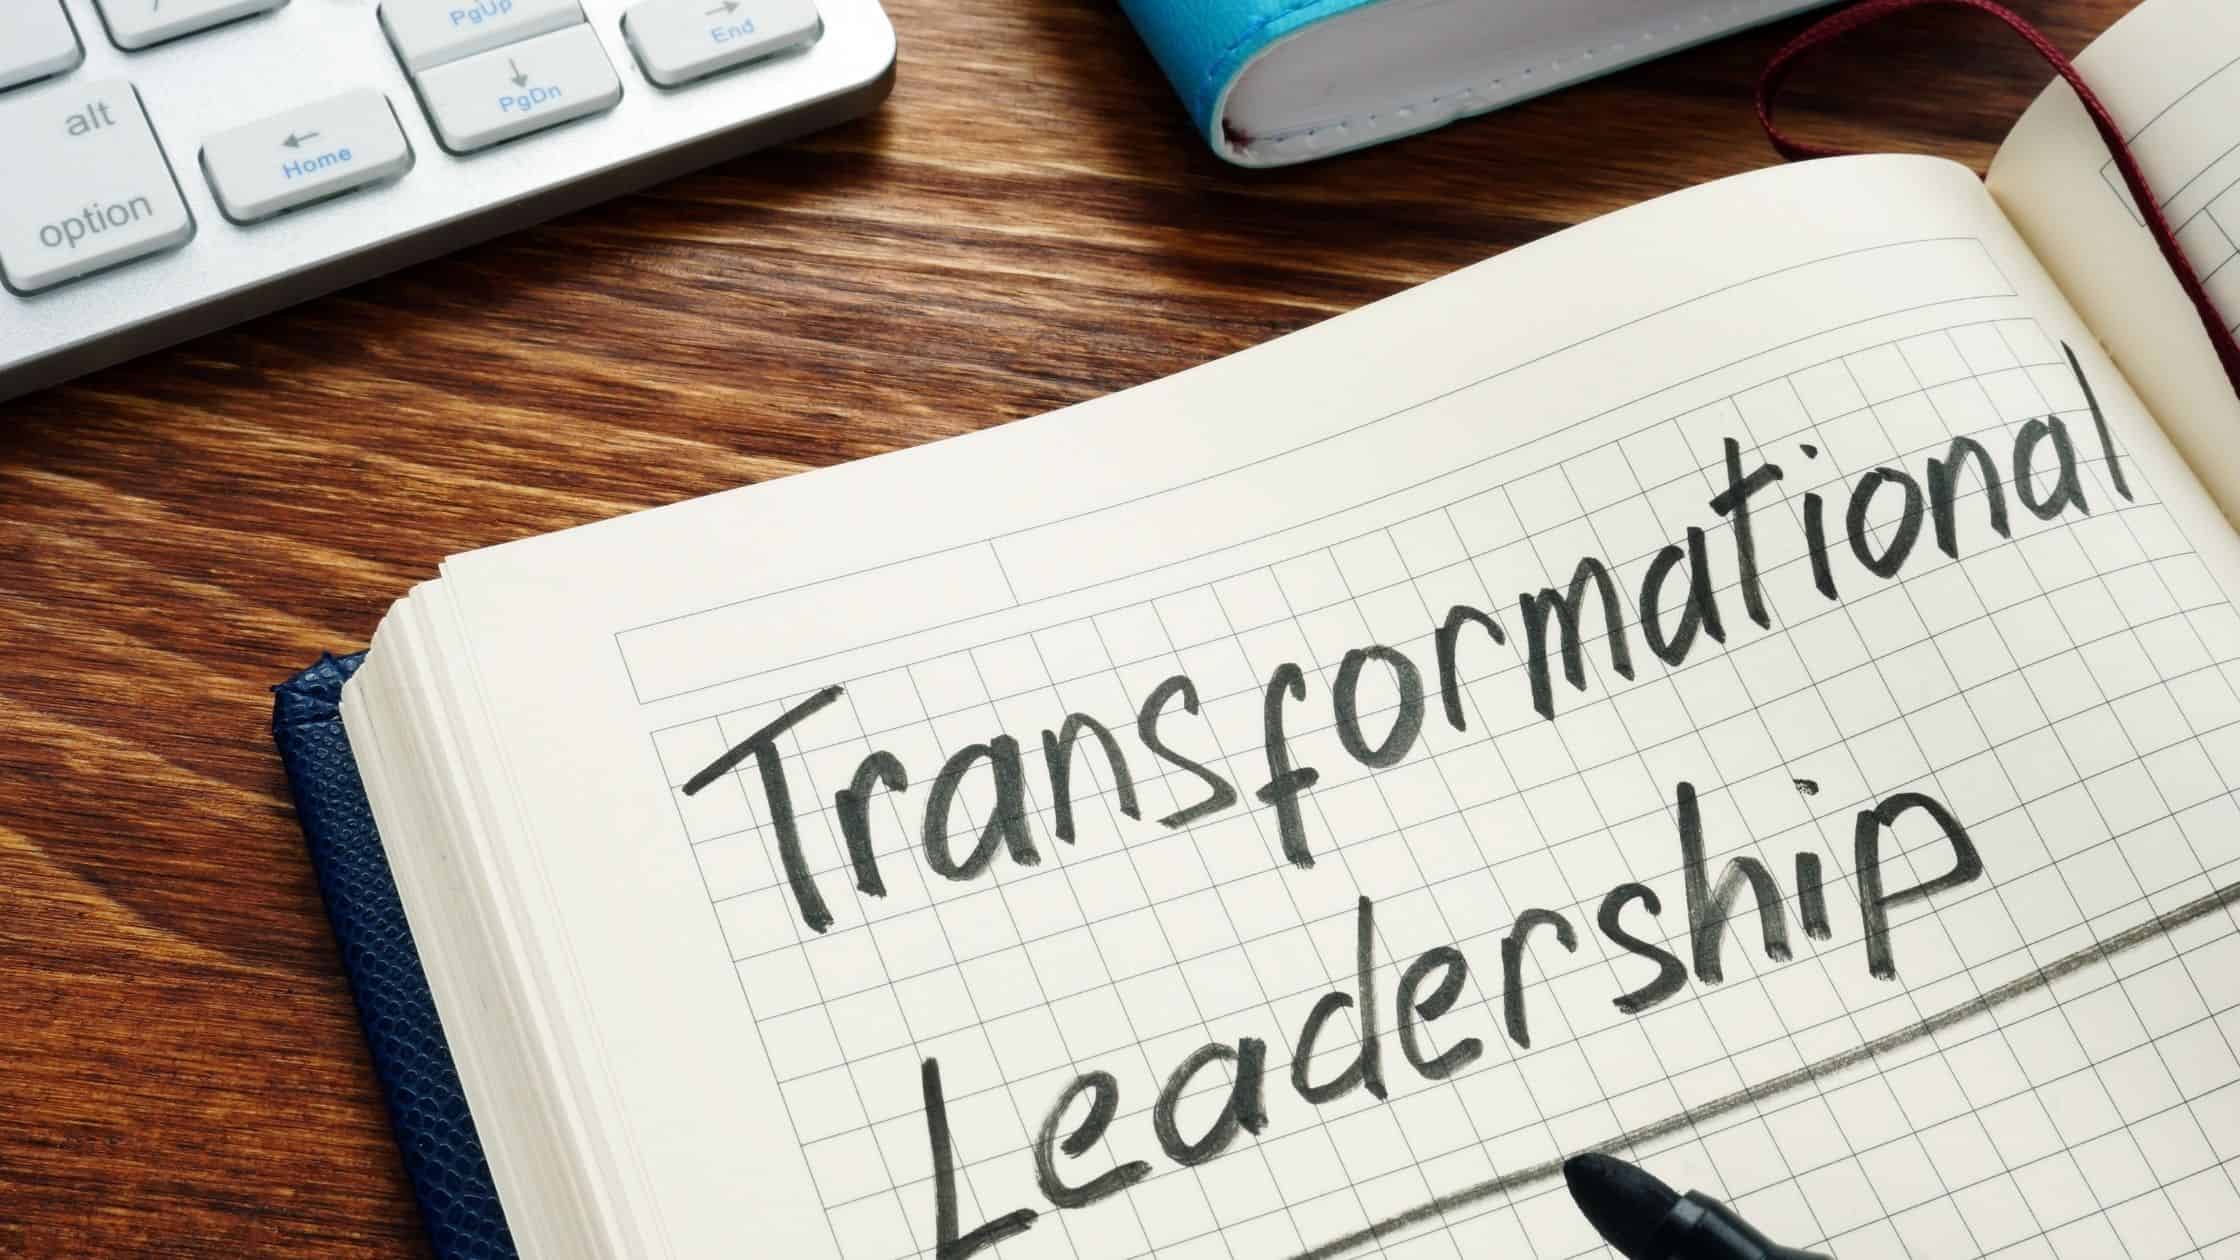 Transform your leadership culture with these eleven tenets.